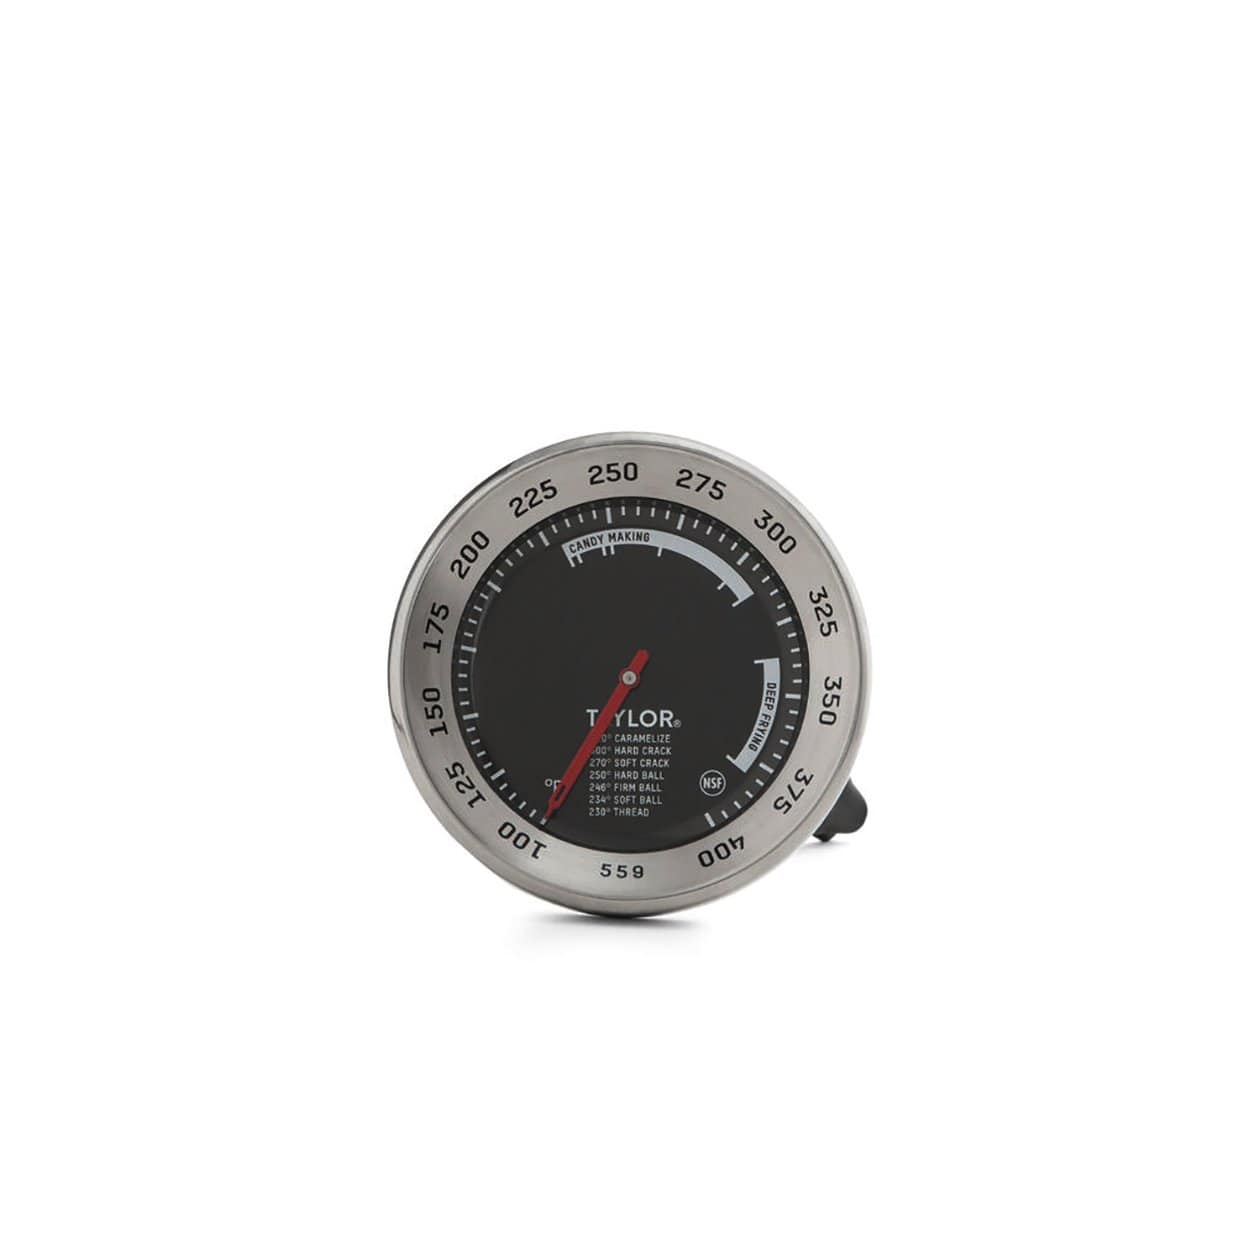 Tylor Home Oven Thermometer